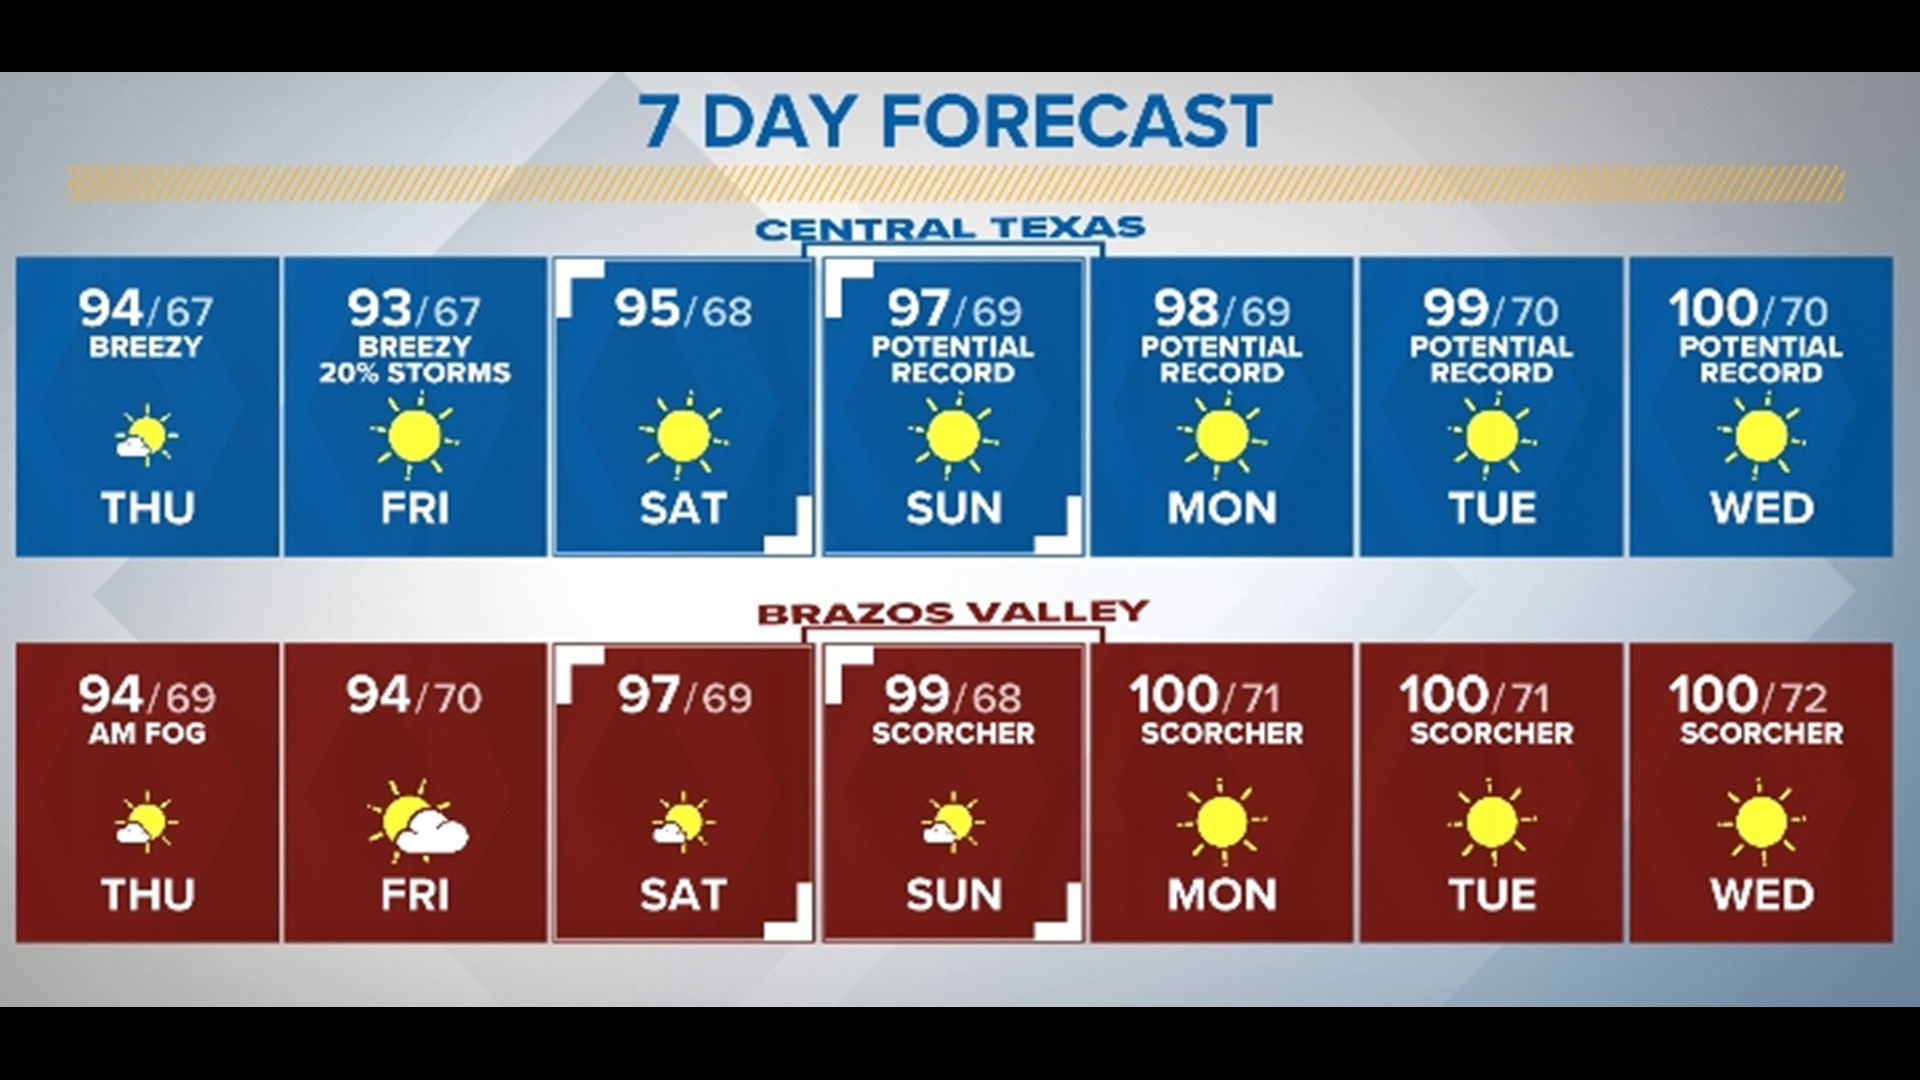 Our hot streak of above average temperatures aren't going anywhere anytime soon, with record breaking heat possible through the next work week.